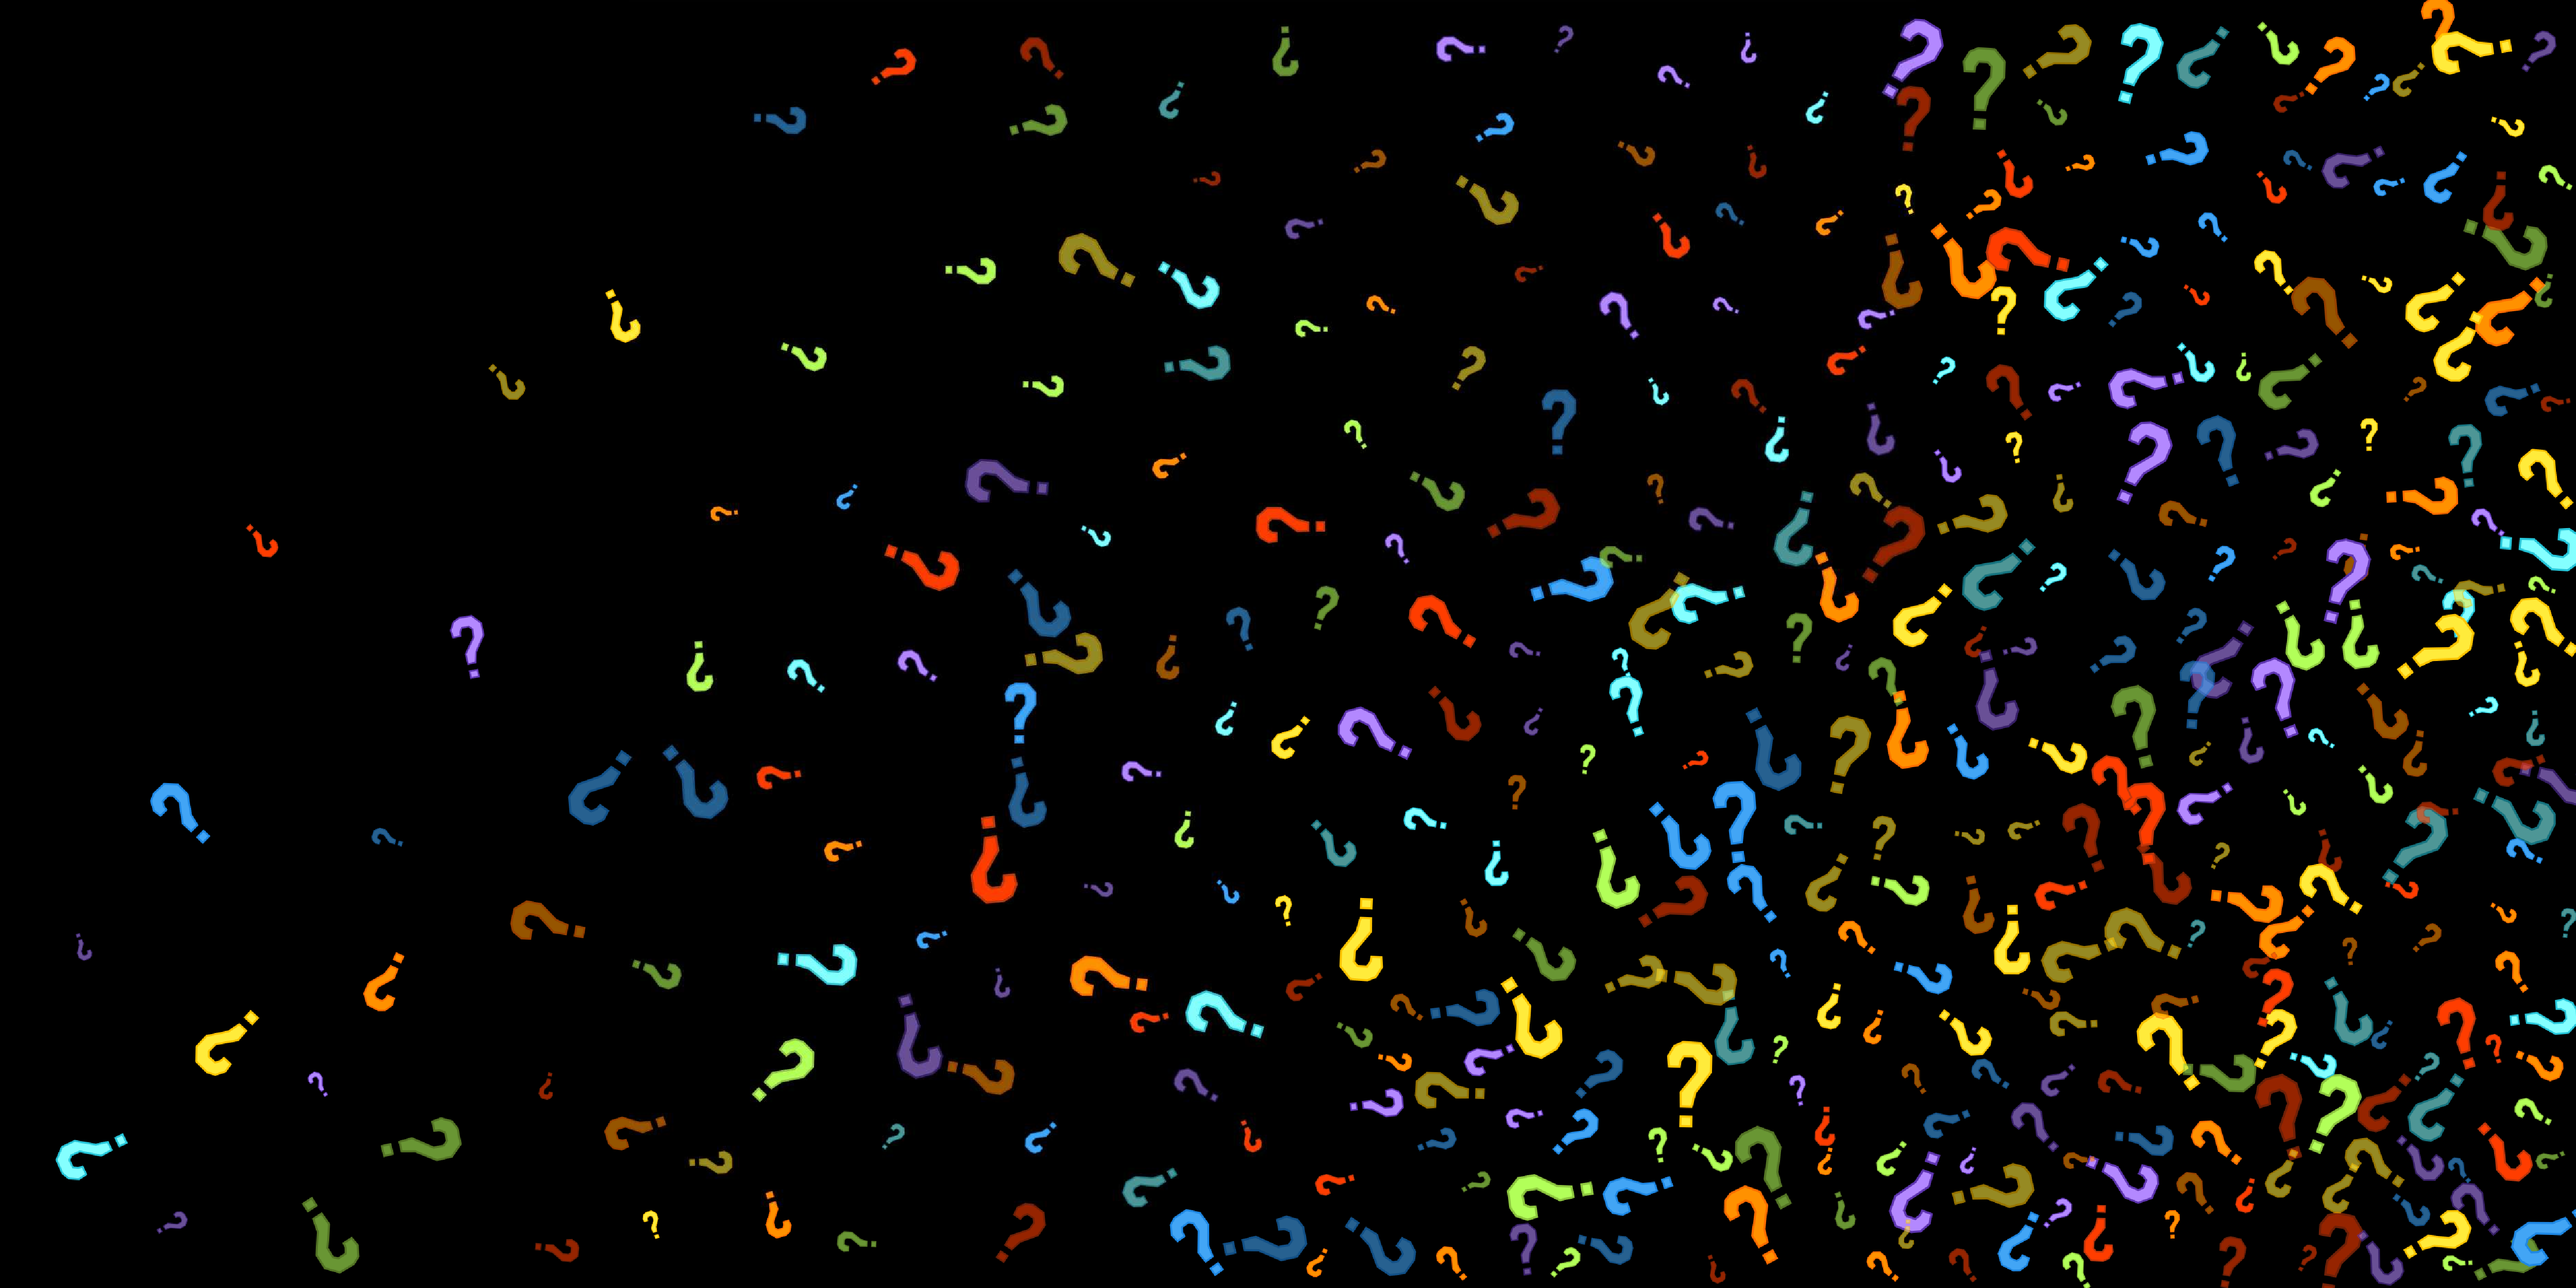 Colorful question marks scattered across a black background